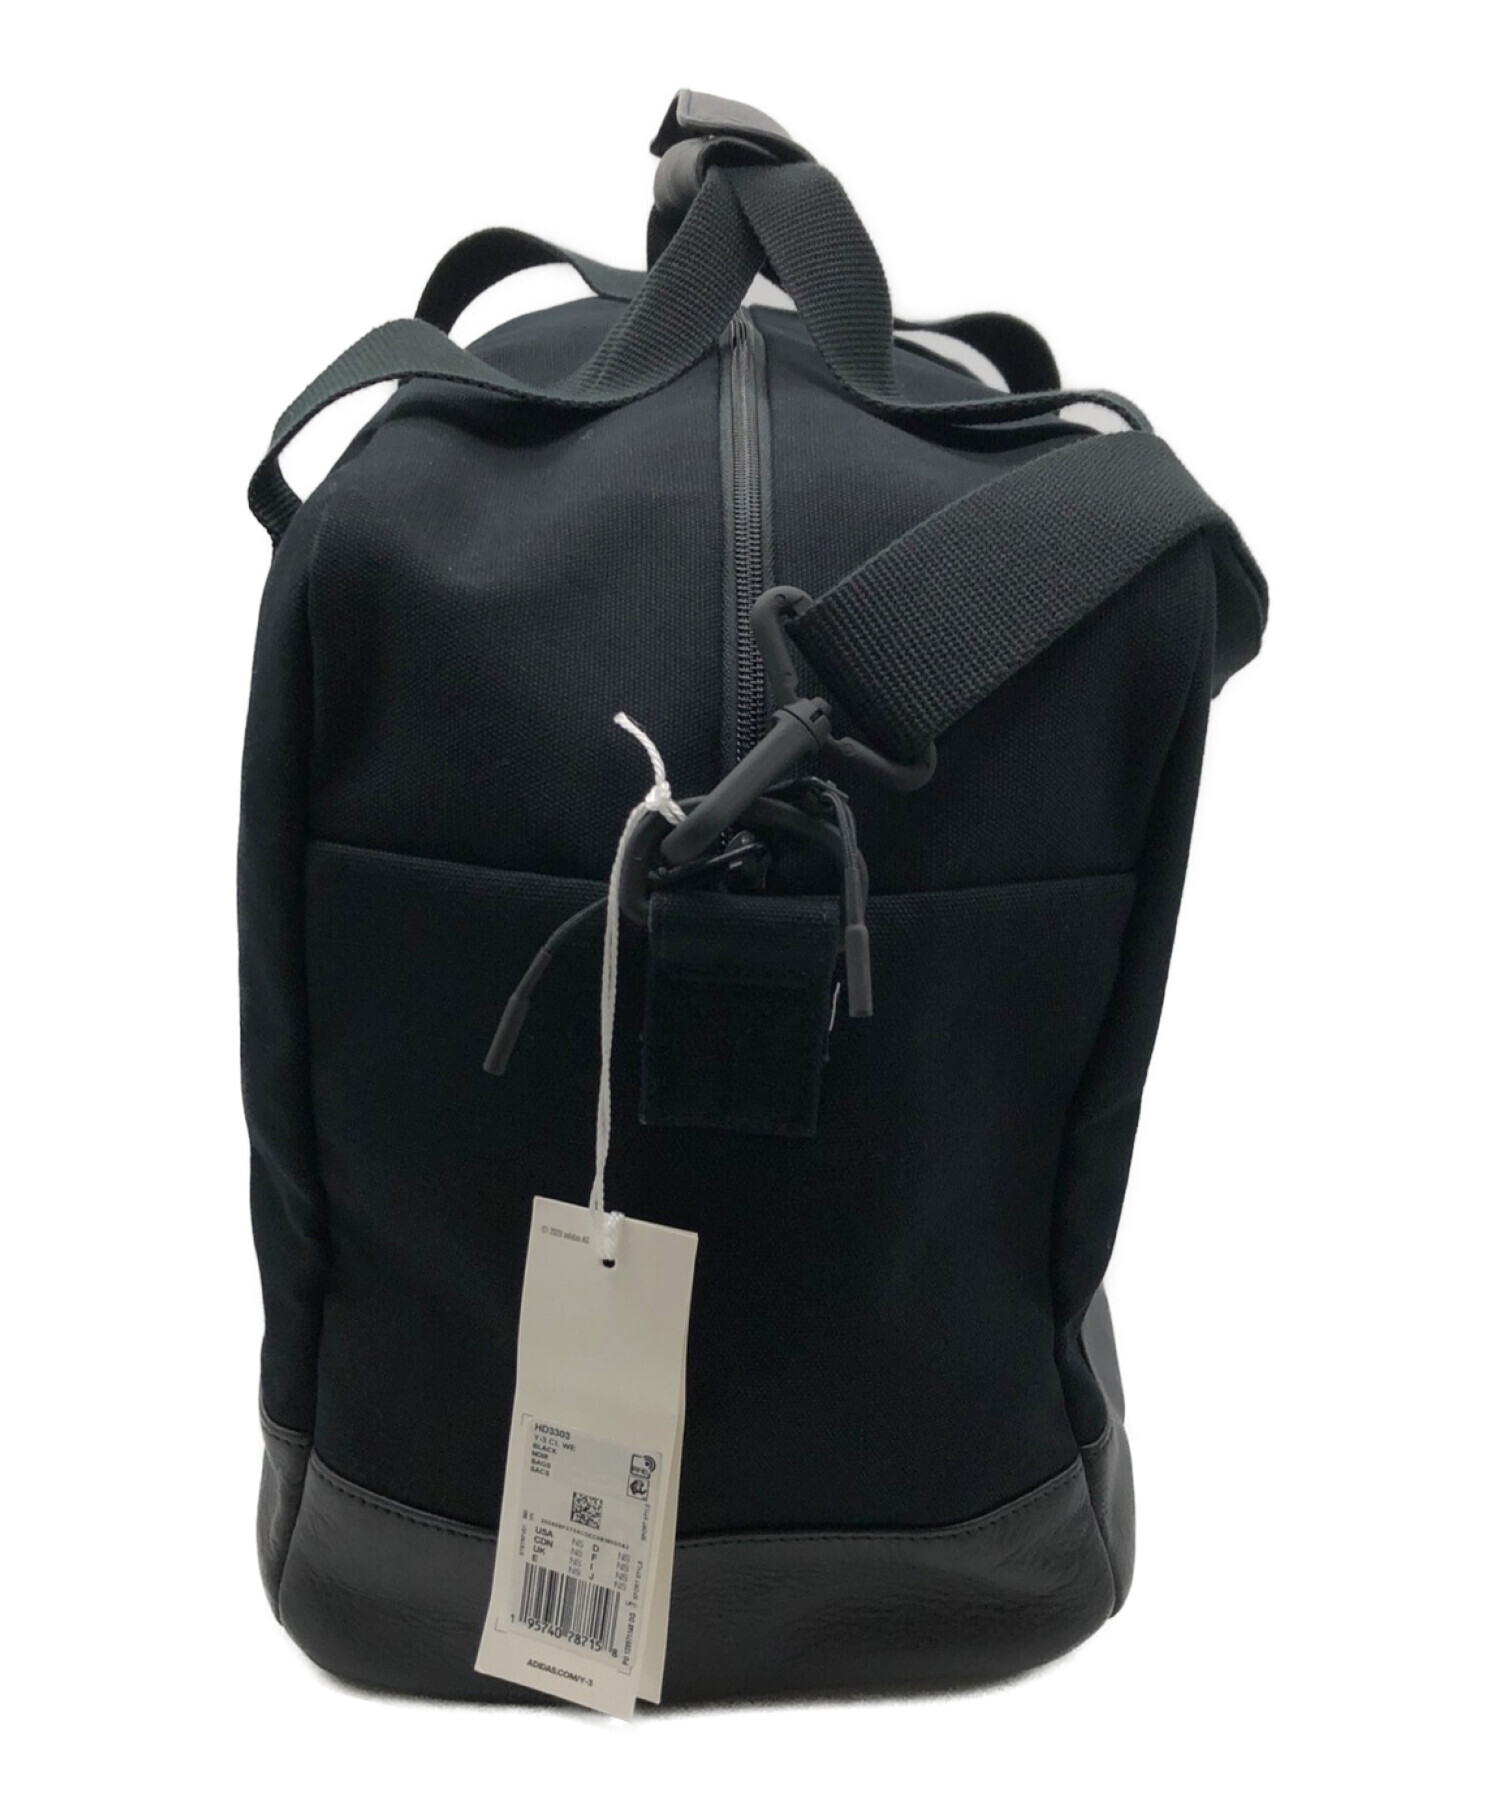 Y-3ボストンバッグ CLASSIC WEEKENDER BAG HM8367